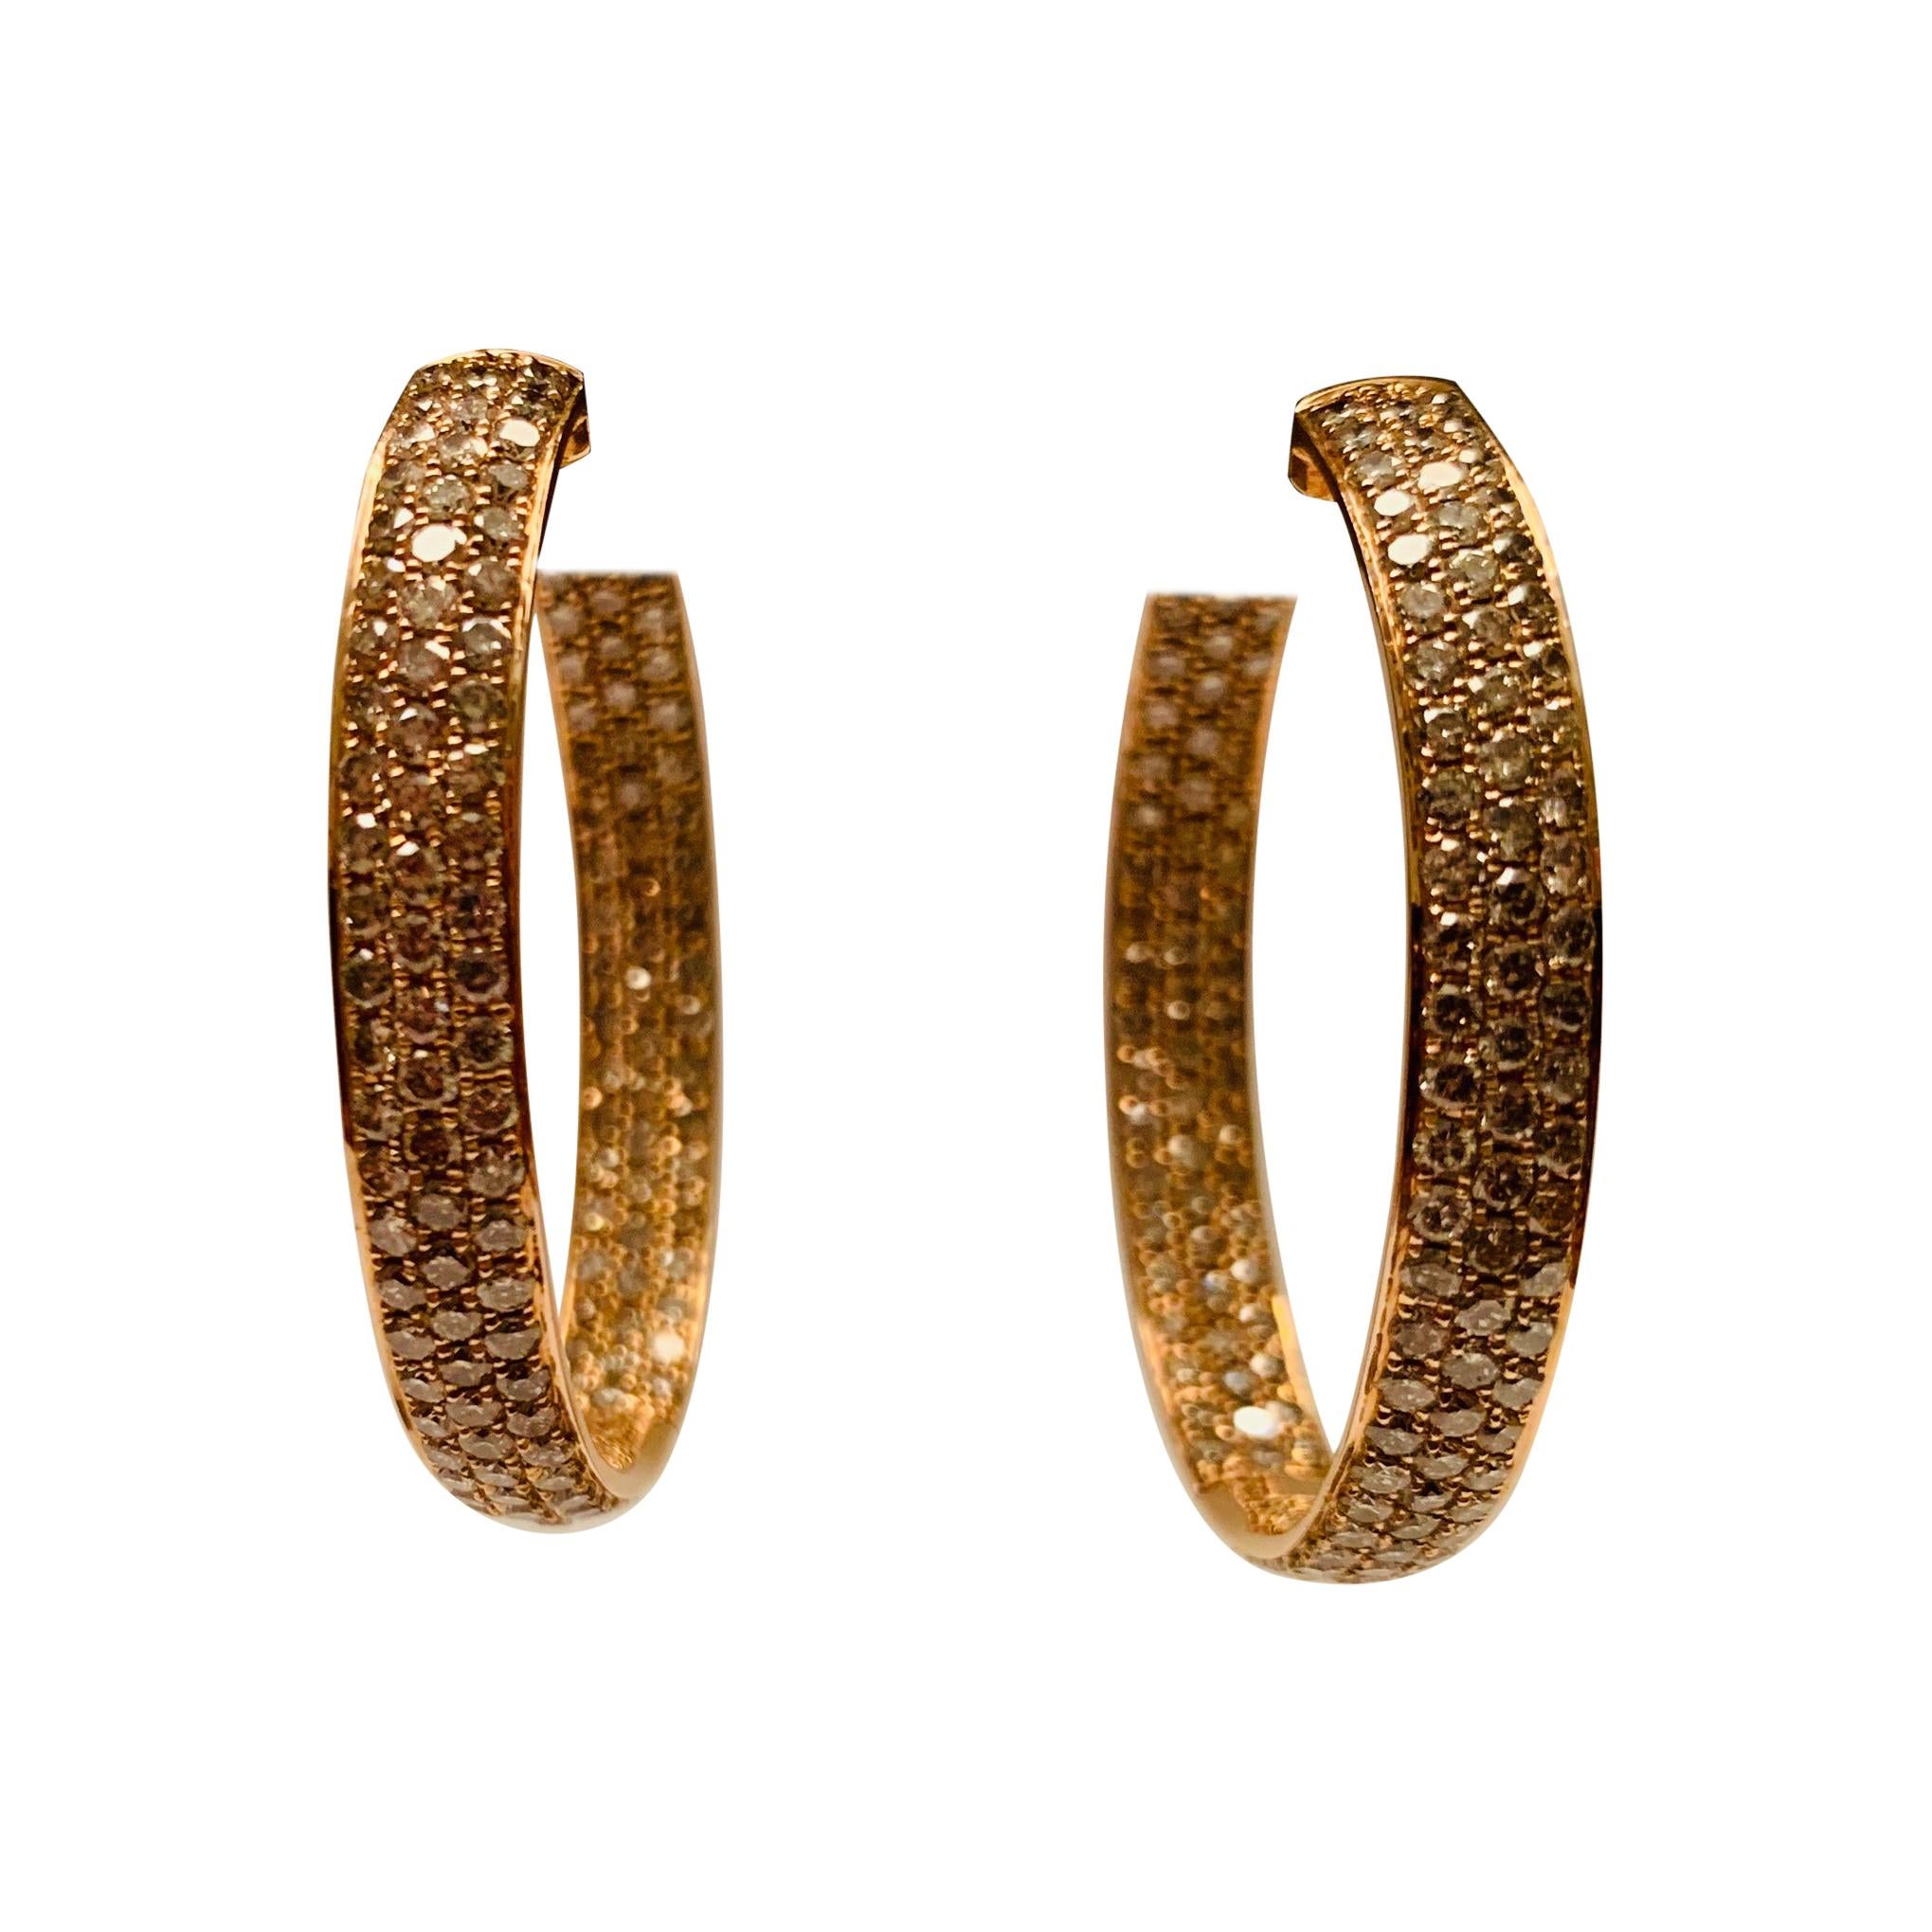 18 Karat Rose Gold Hinged Hoop Style Earrings Pave Set with Champagne Diamonds